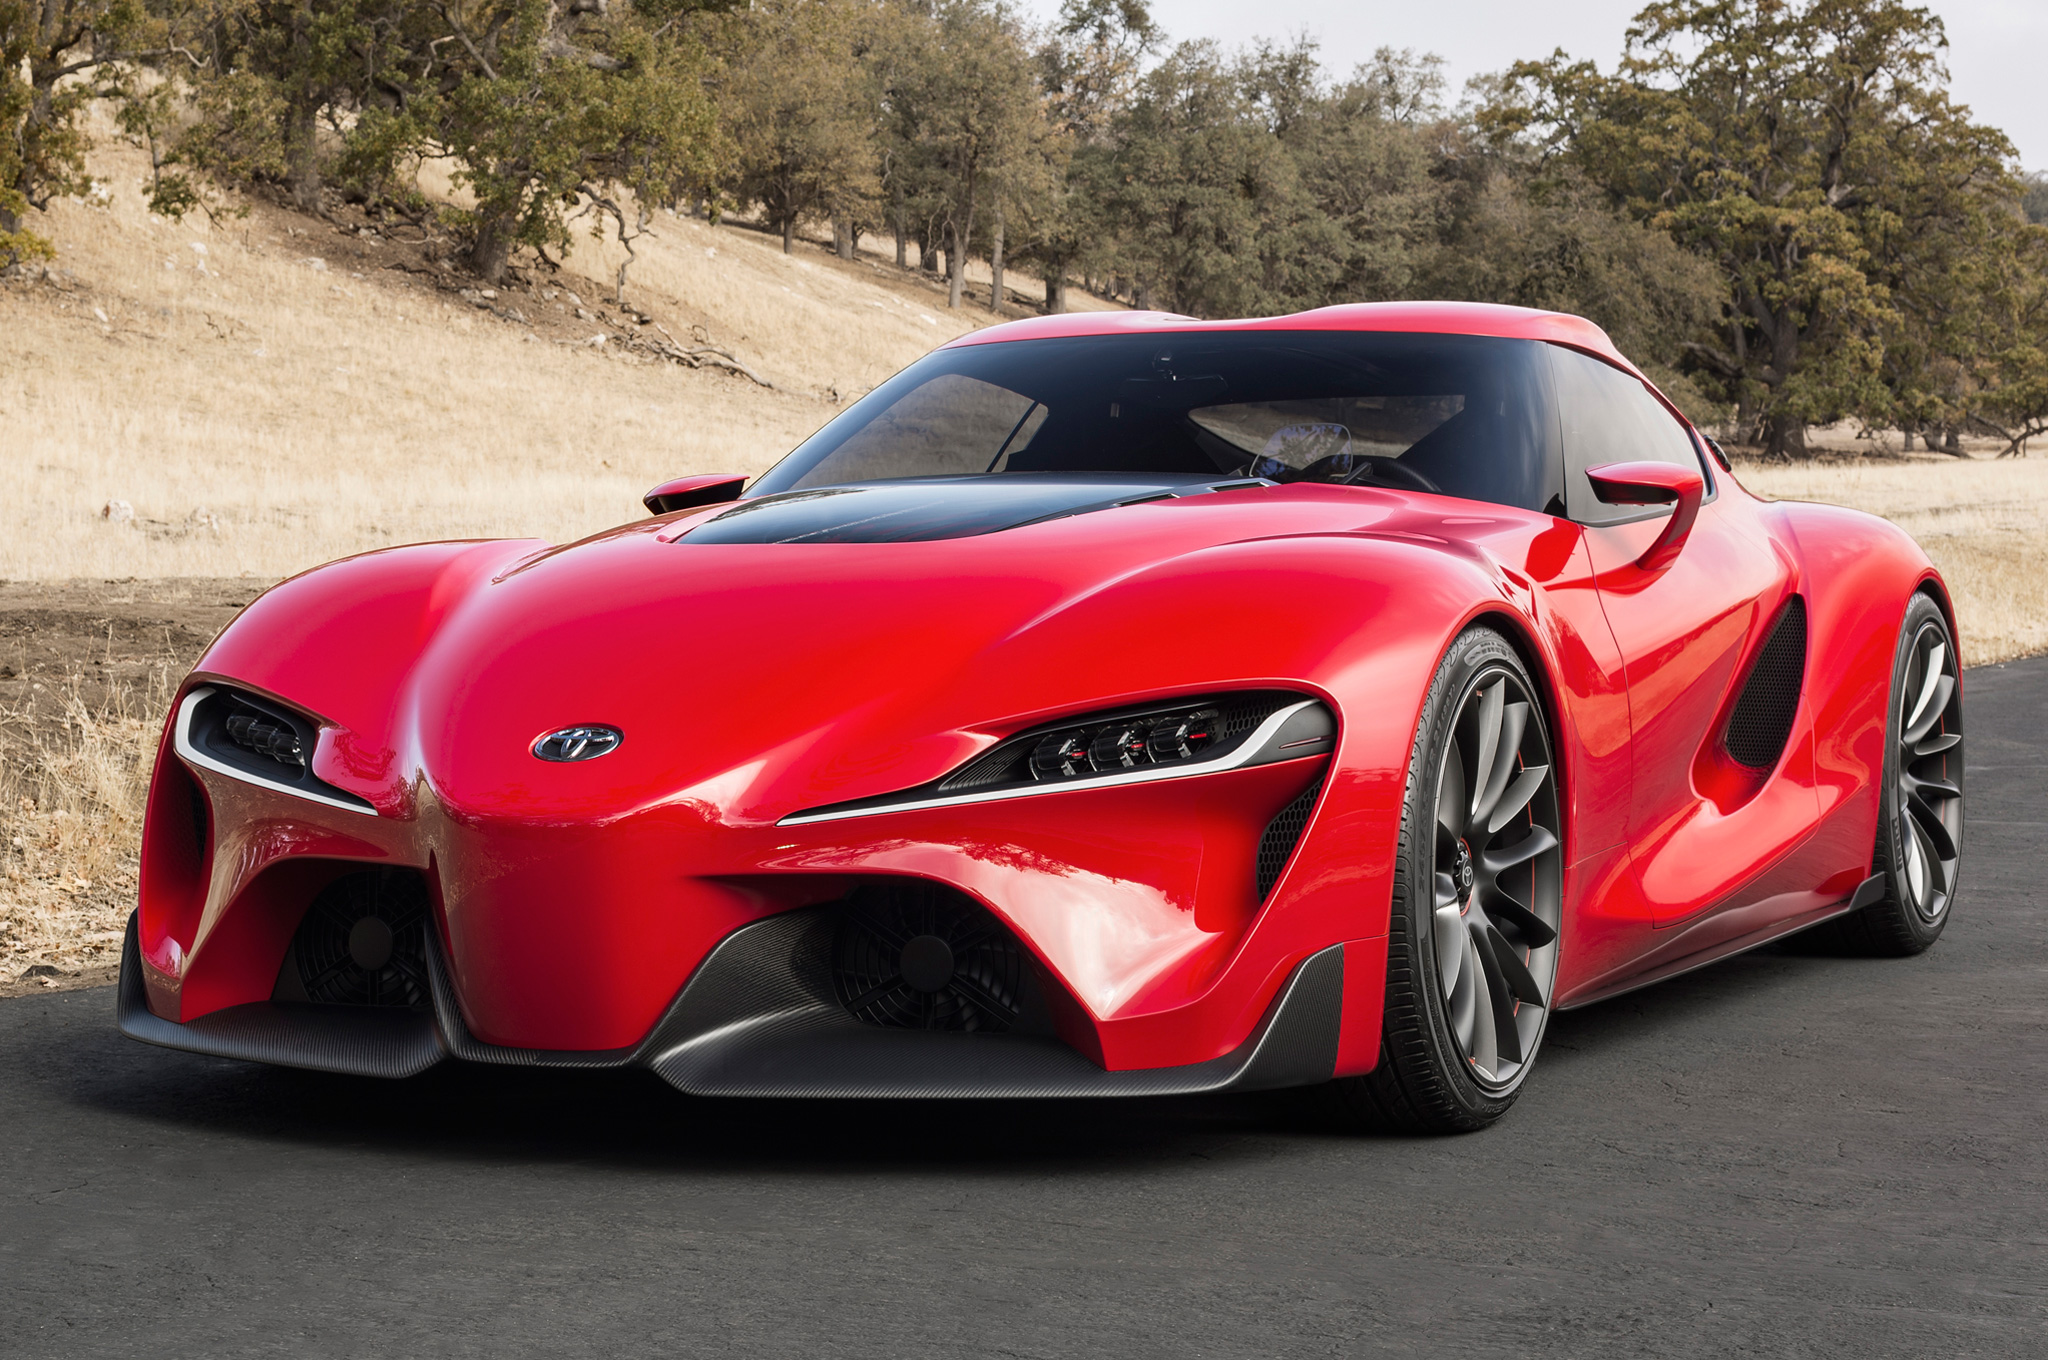 toyota-ft-1-concept-front-three-quarters-view-on-road.jpg